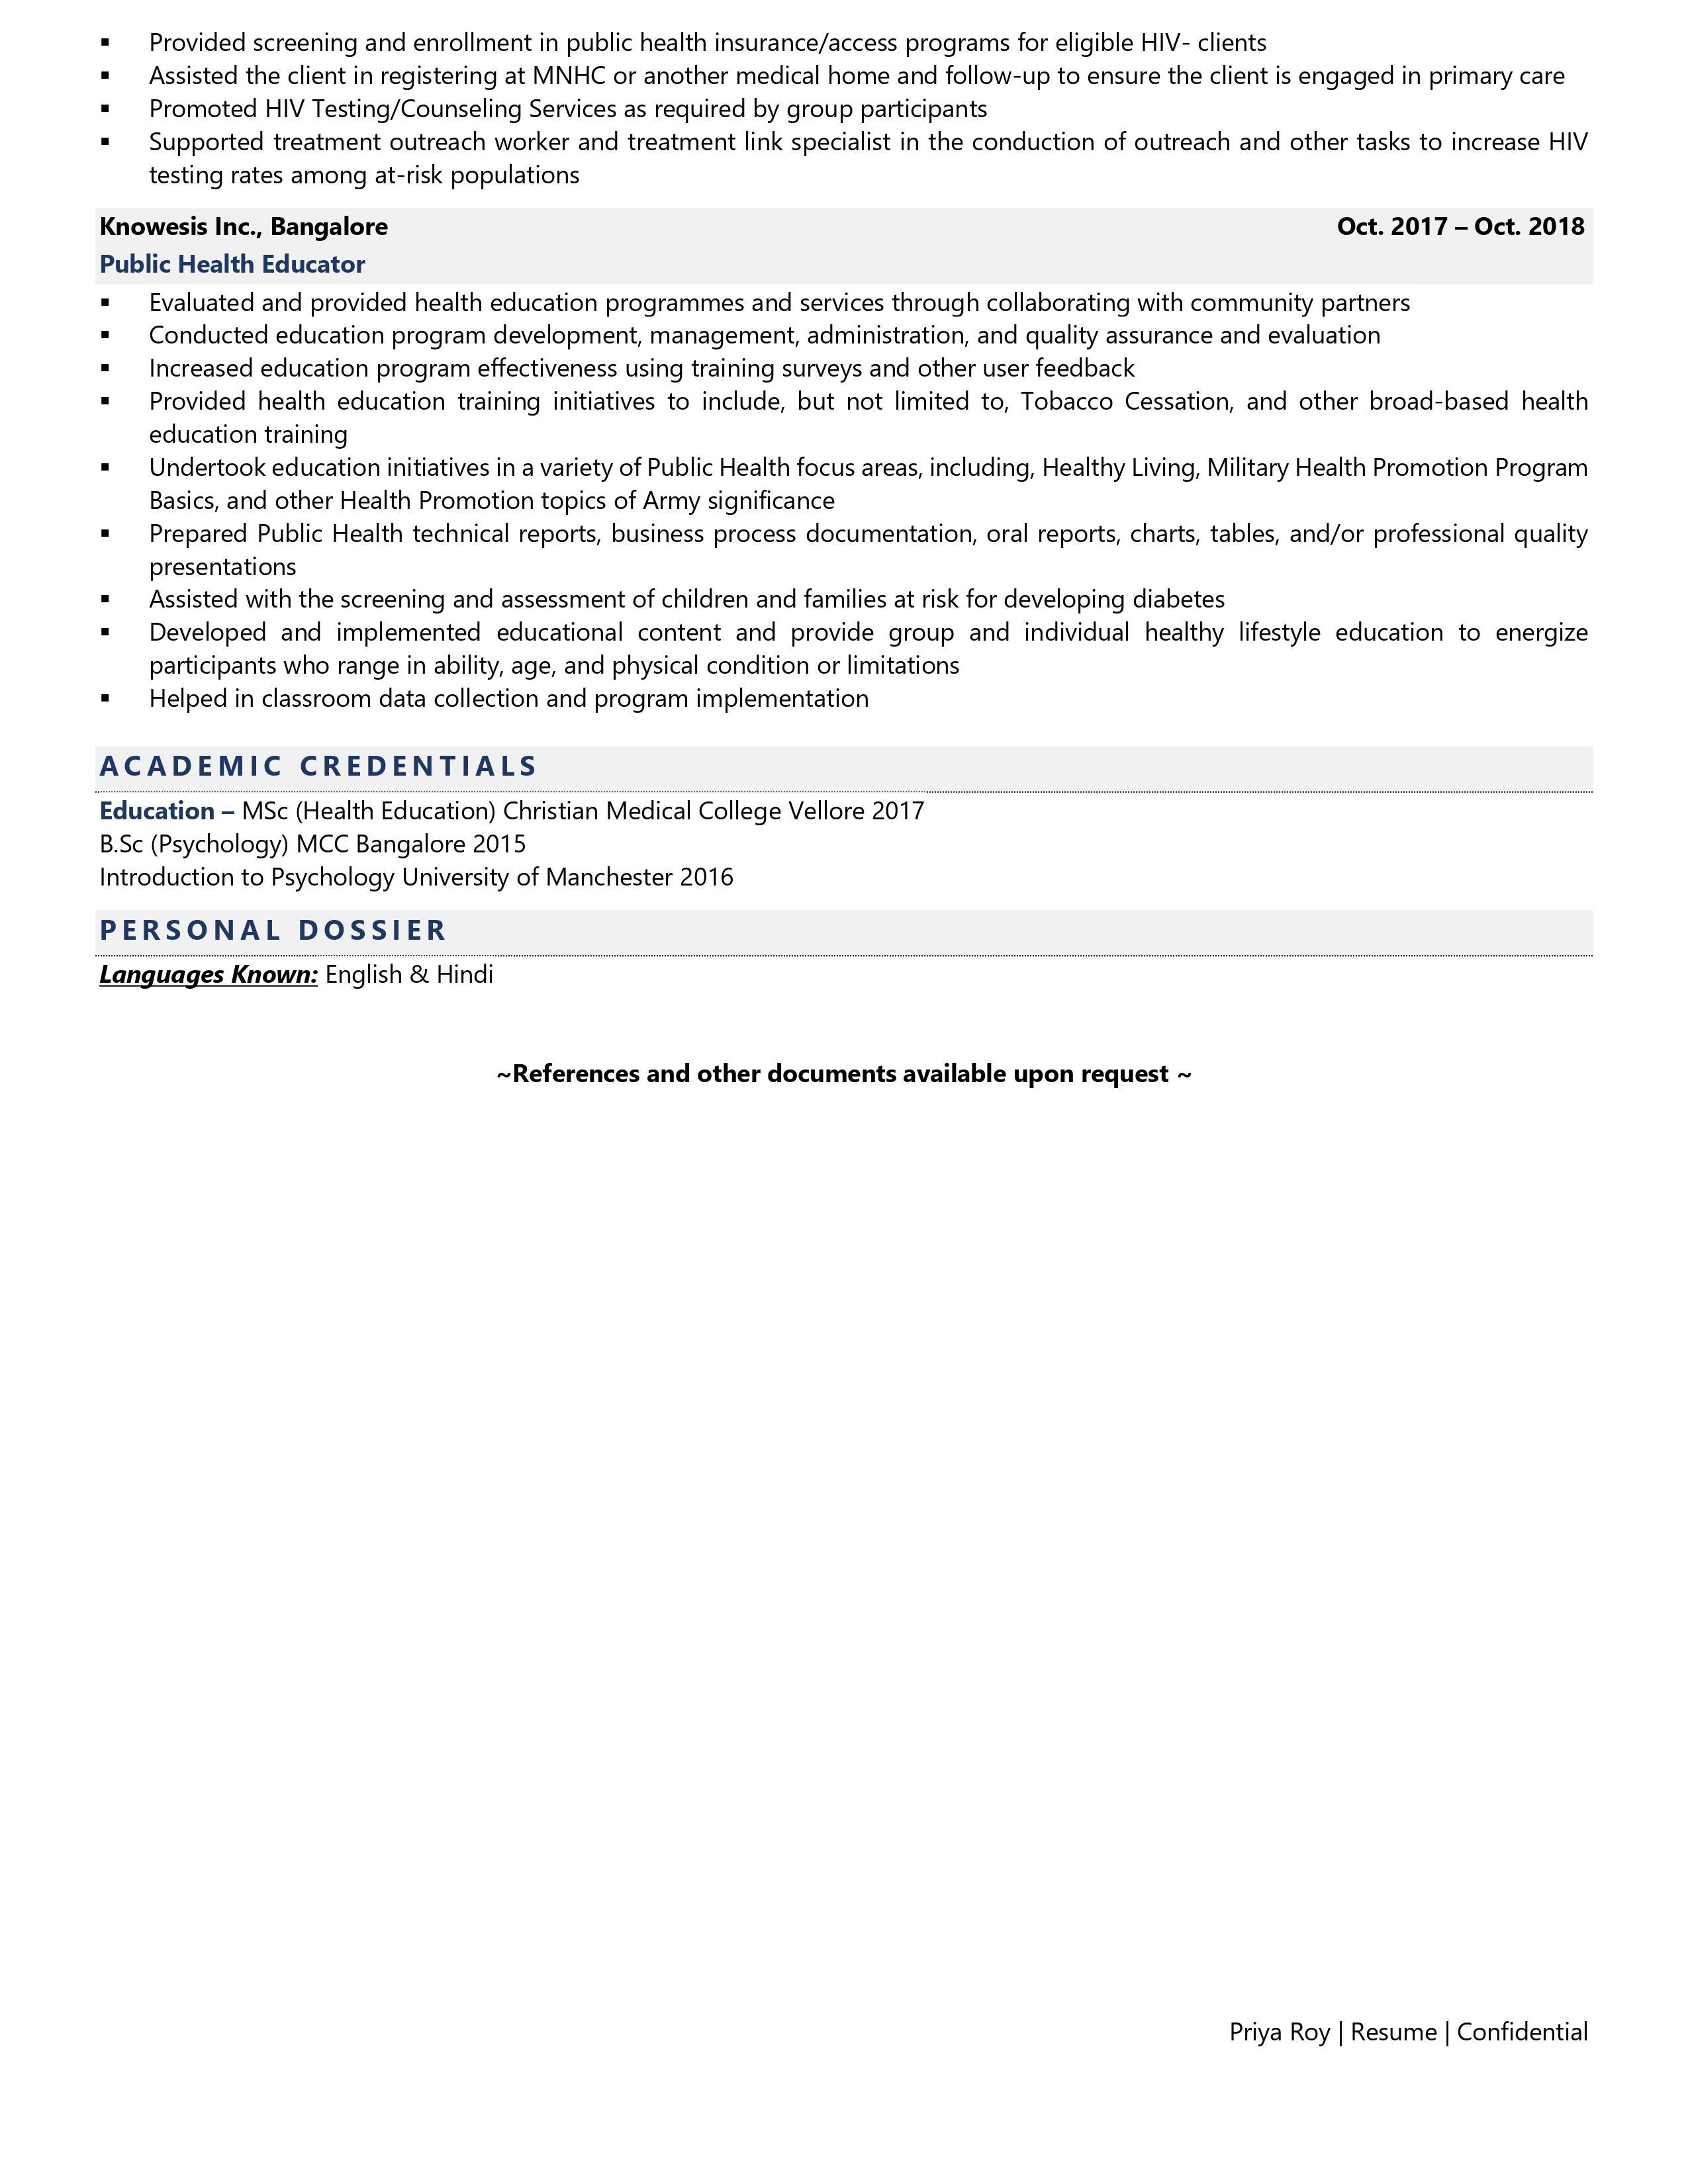 Health Education Specialist - Resume Example & Template